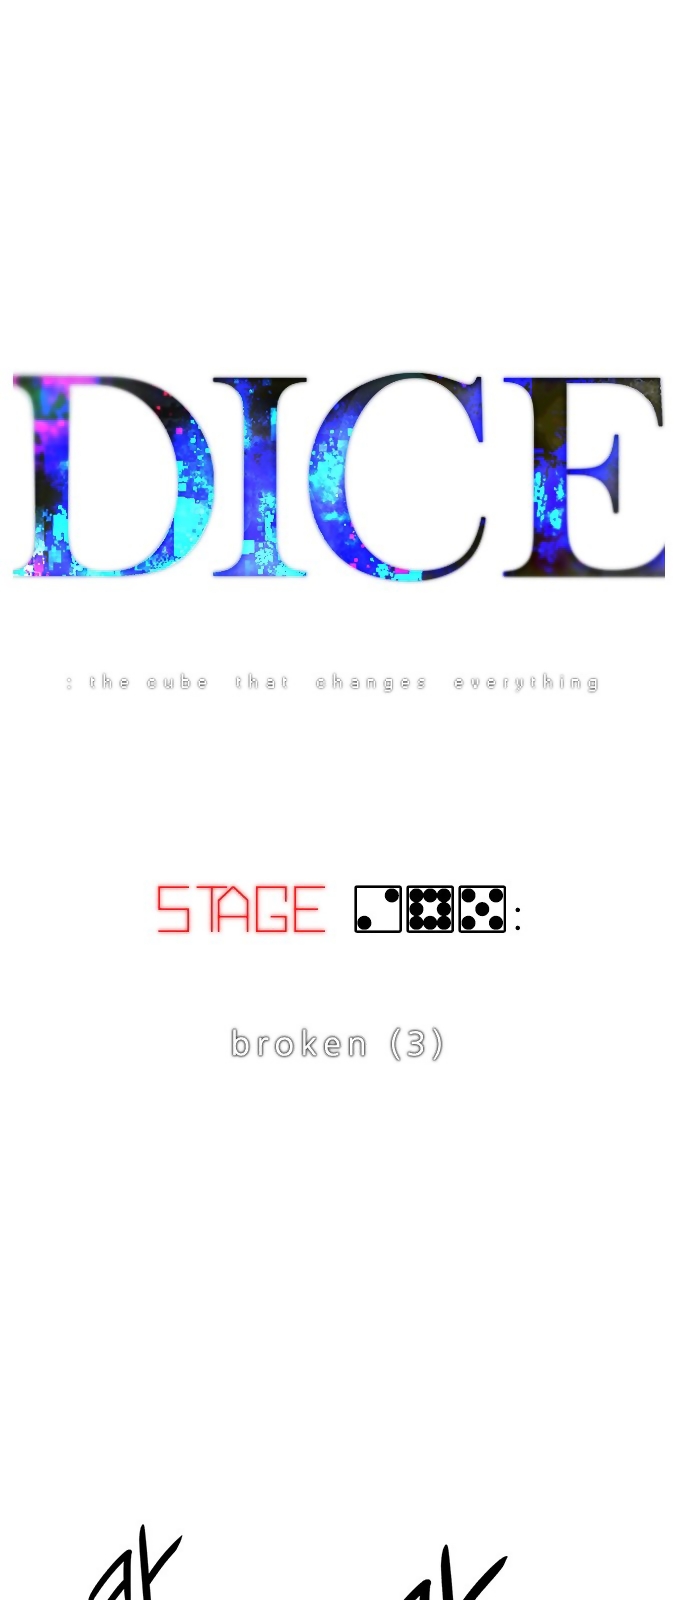 DICE: The Cube that Changes Everything Ch. 285 broken (3)